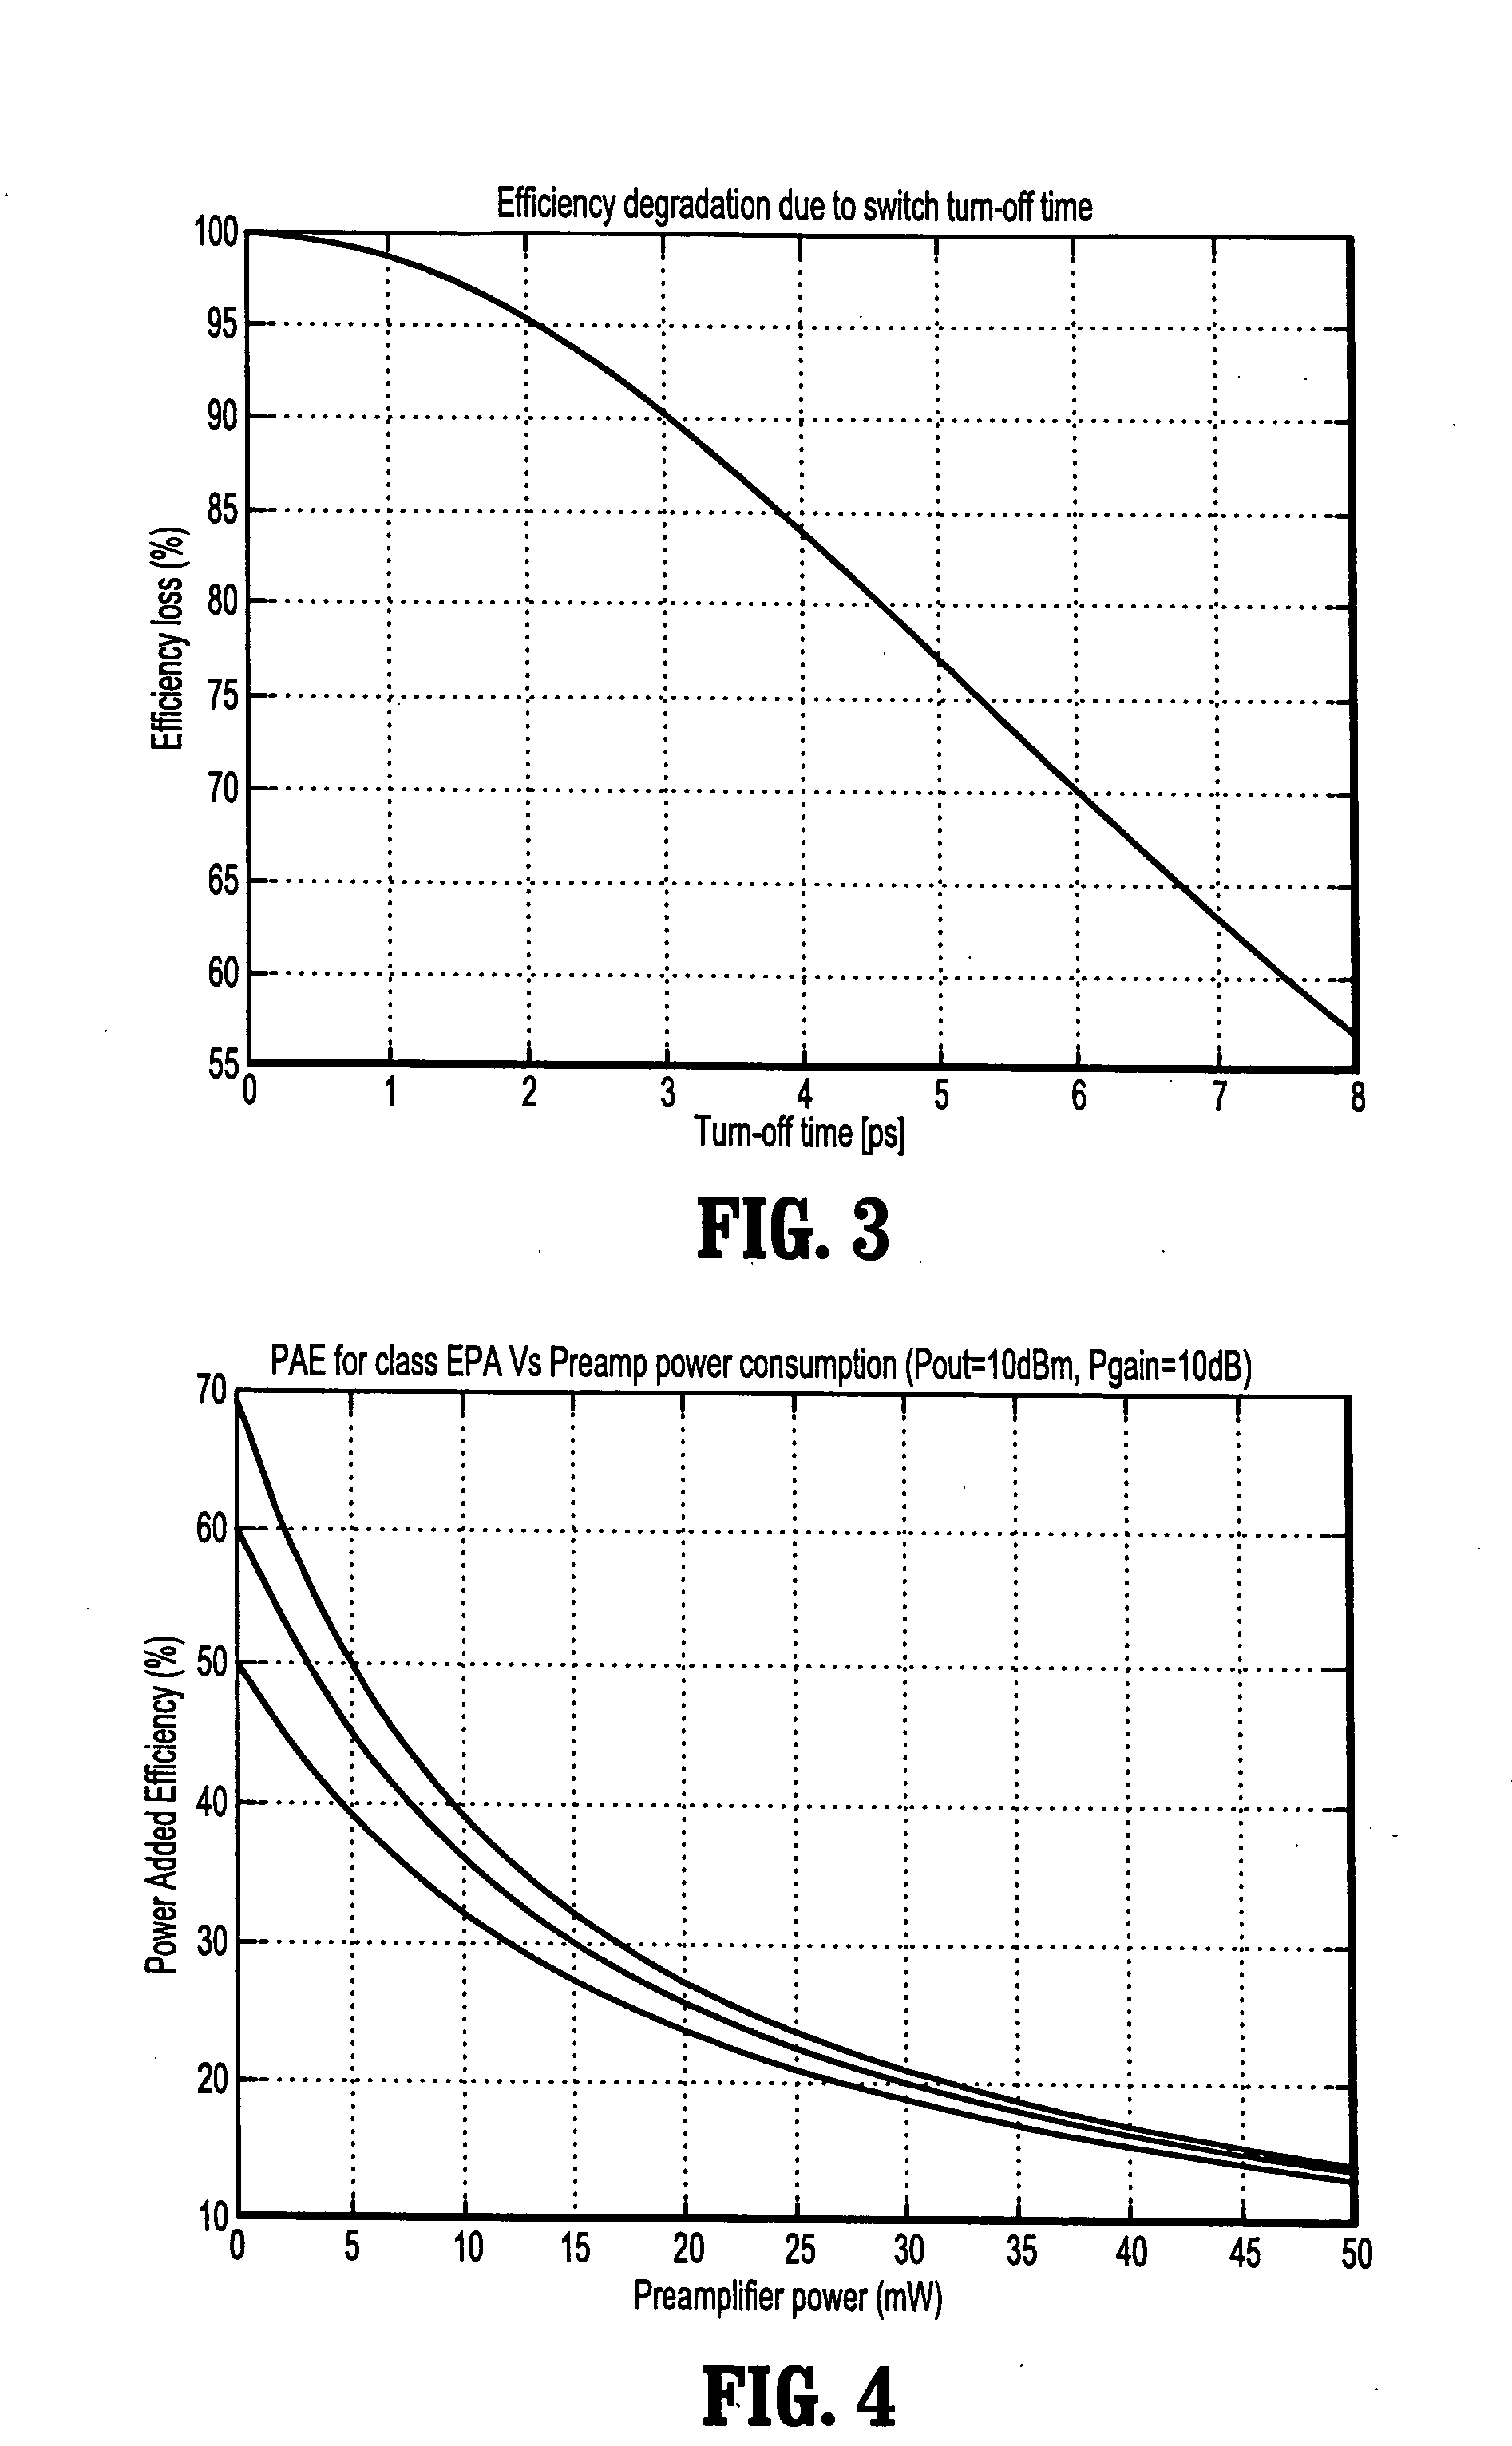 Circuits and methods for implementing power amplifiers for millimeter wave applications